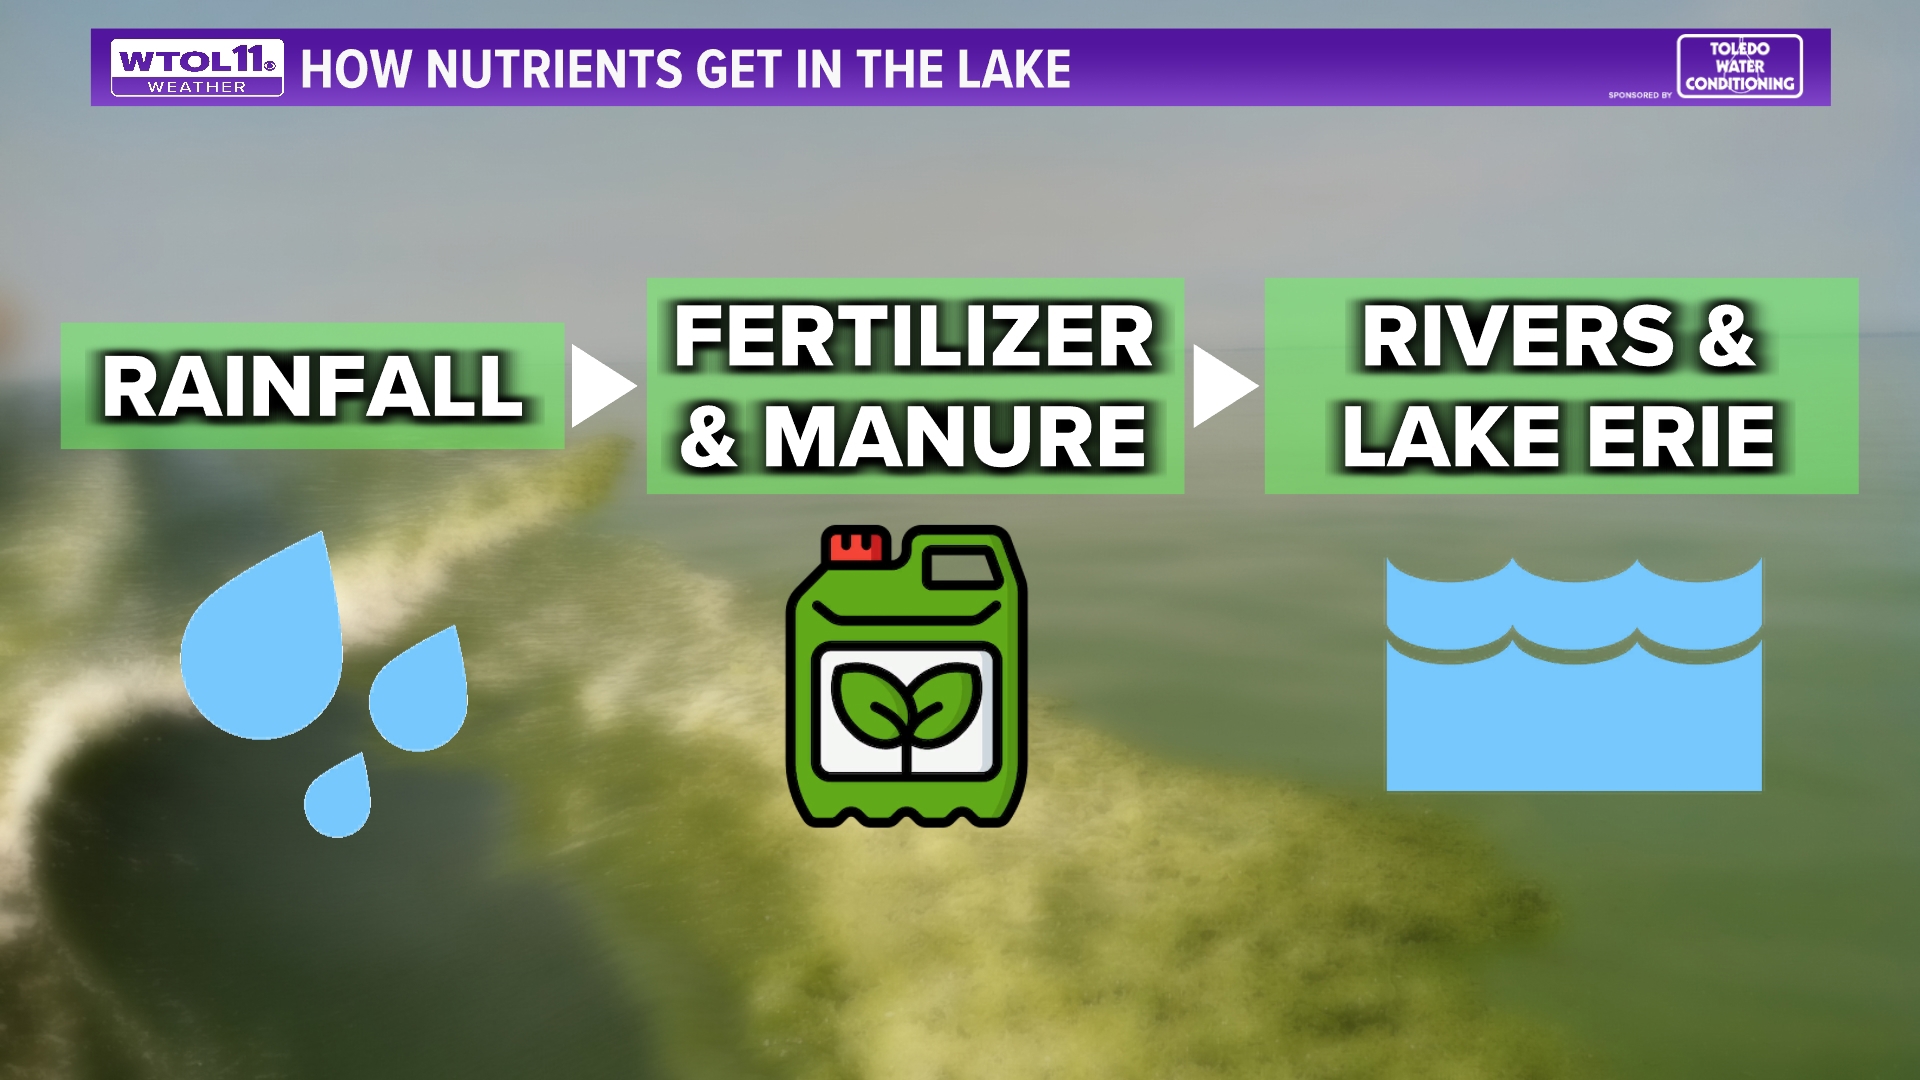 Each year, a harmful algal bloom forms in Lake Erie. Here's why heavy spring rainfall can make an impact on its size.